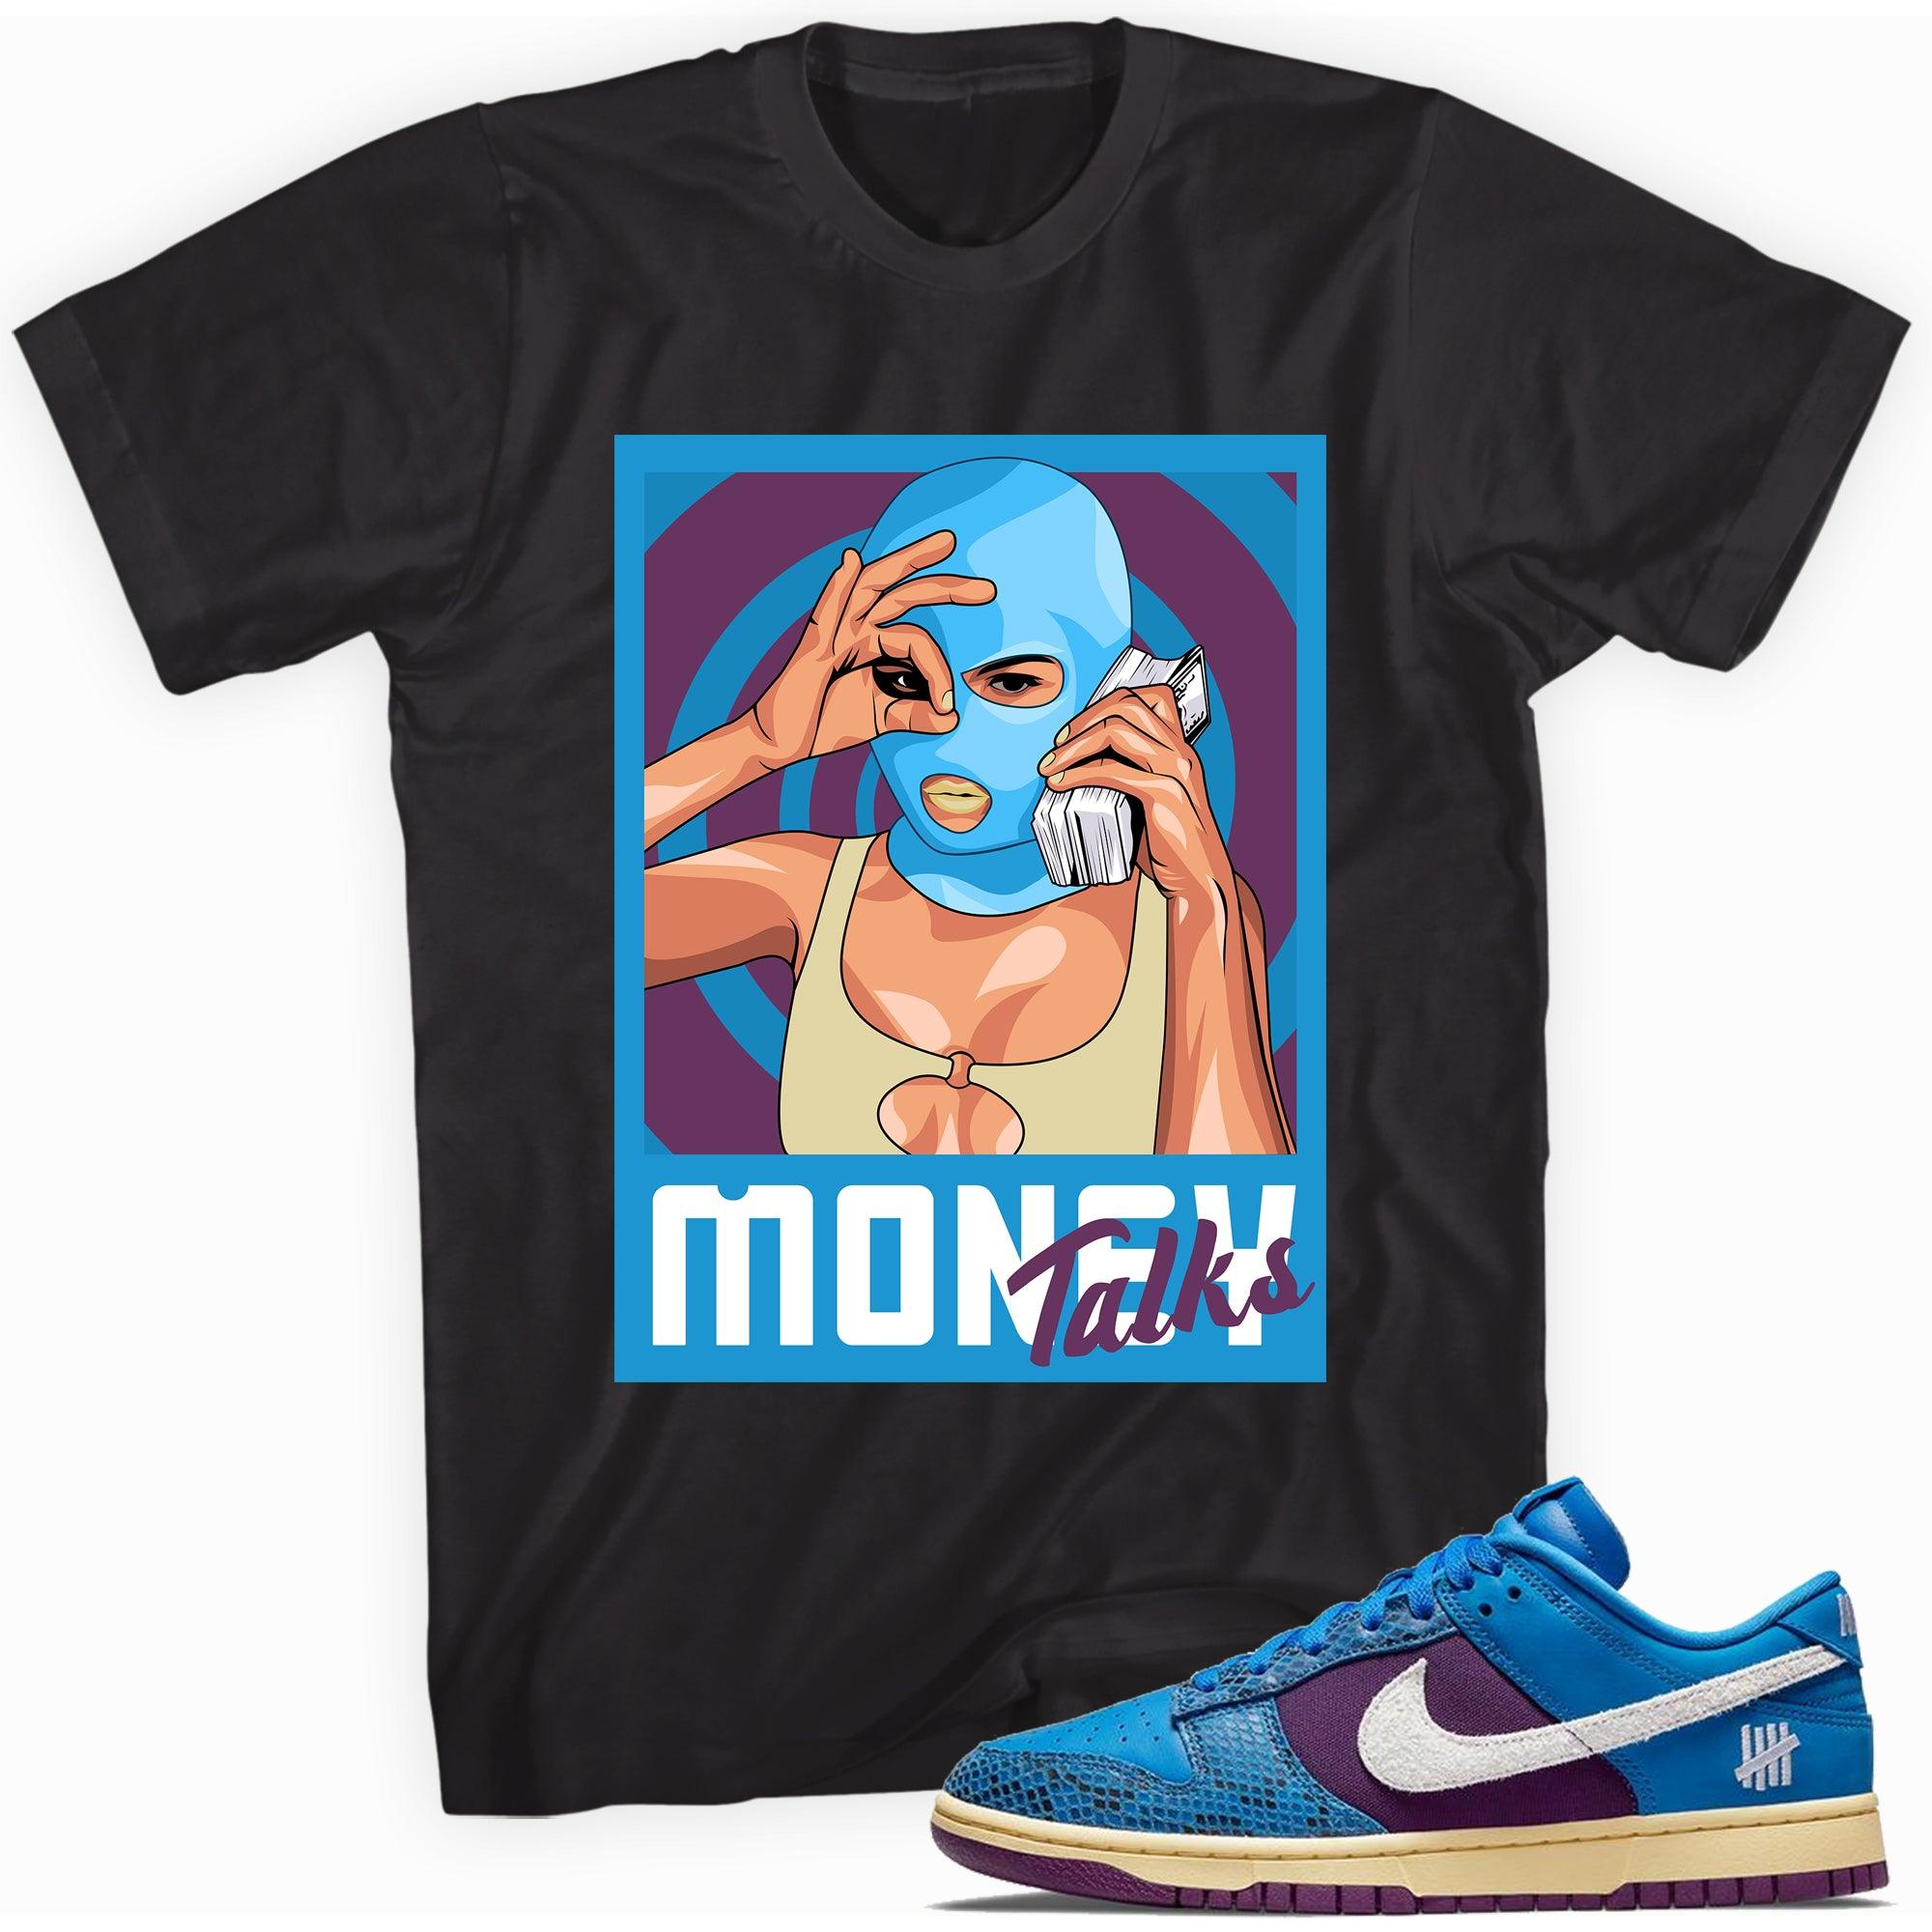 Money Talks Shirt Nike Dunk Low Undefeated 5 On It Dunk vs AF1 Sneakers photo